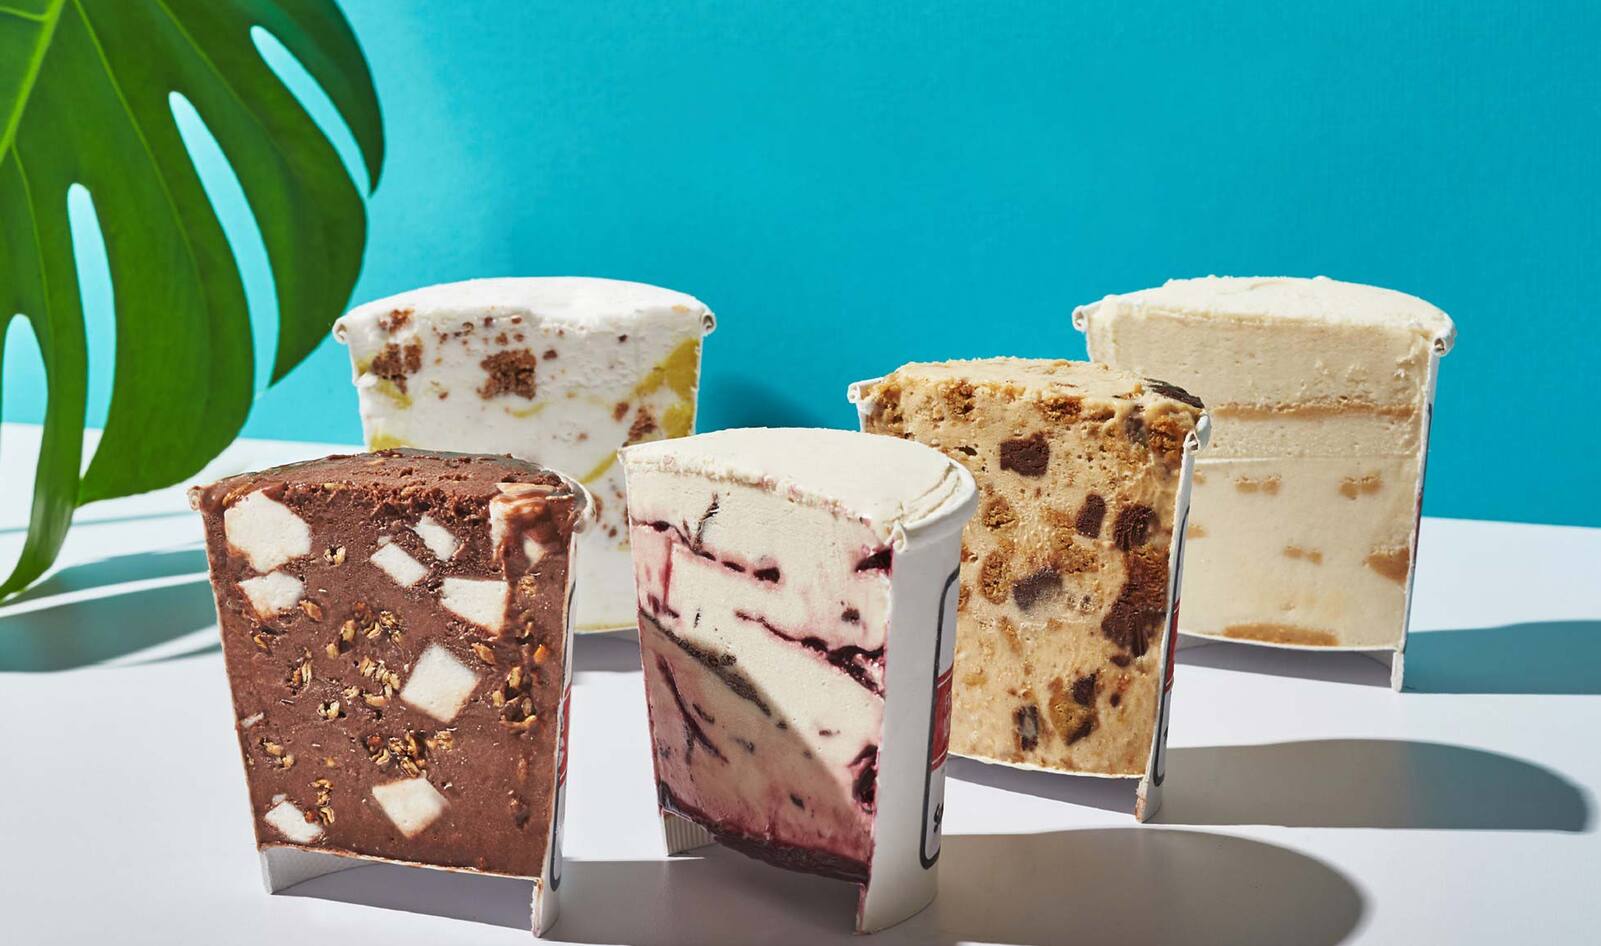 The 2020 Summertime Guide to the Best Vegan Ice Creams